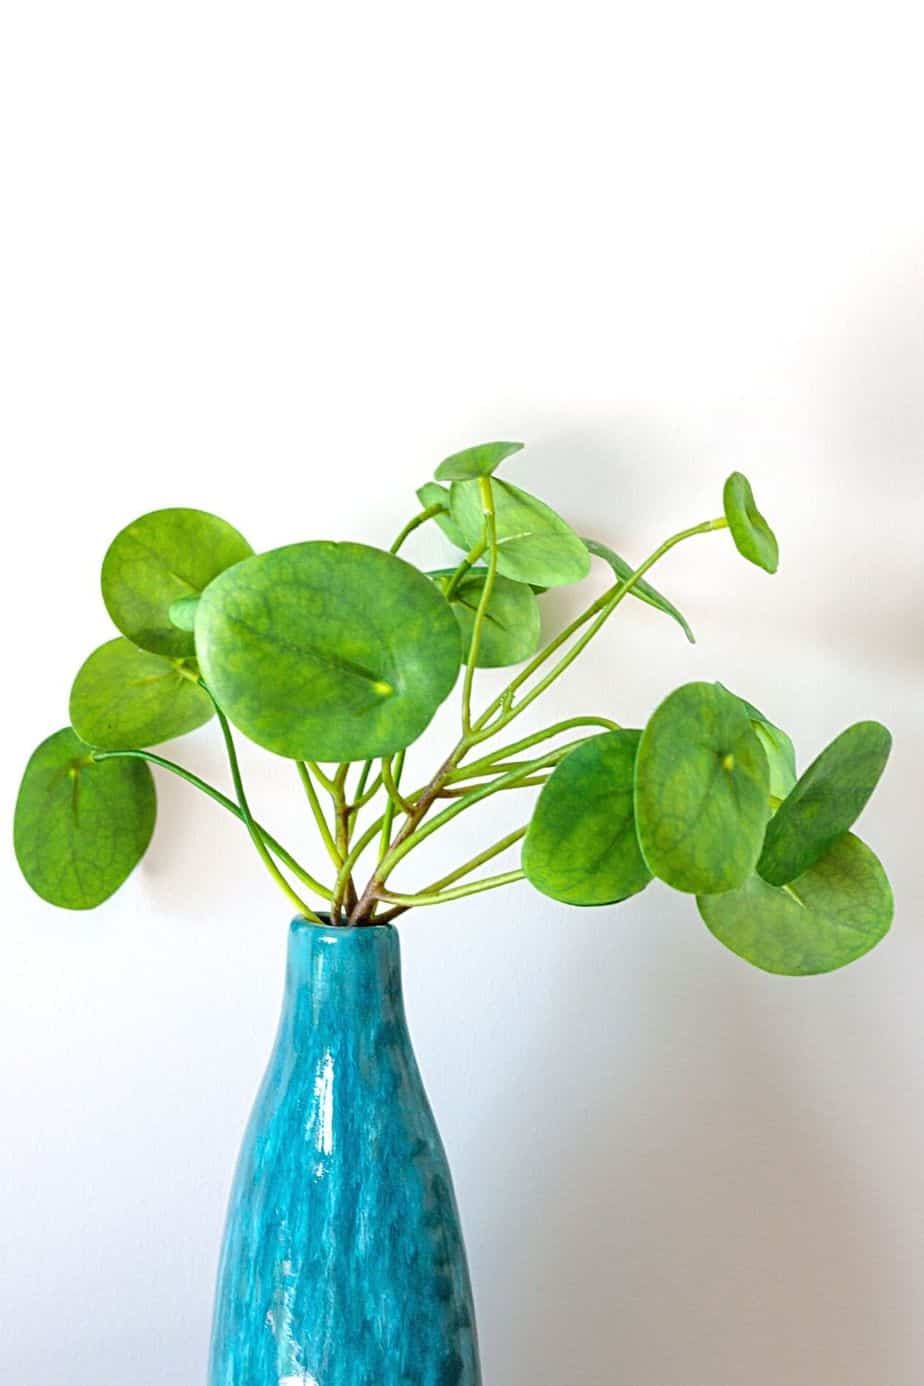 Chinese Money Plant, with its round leaves, looks good when you grow it in glass vases filled with water